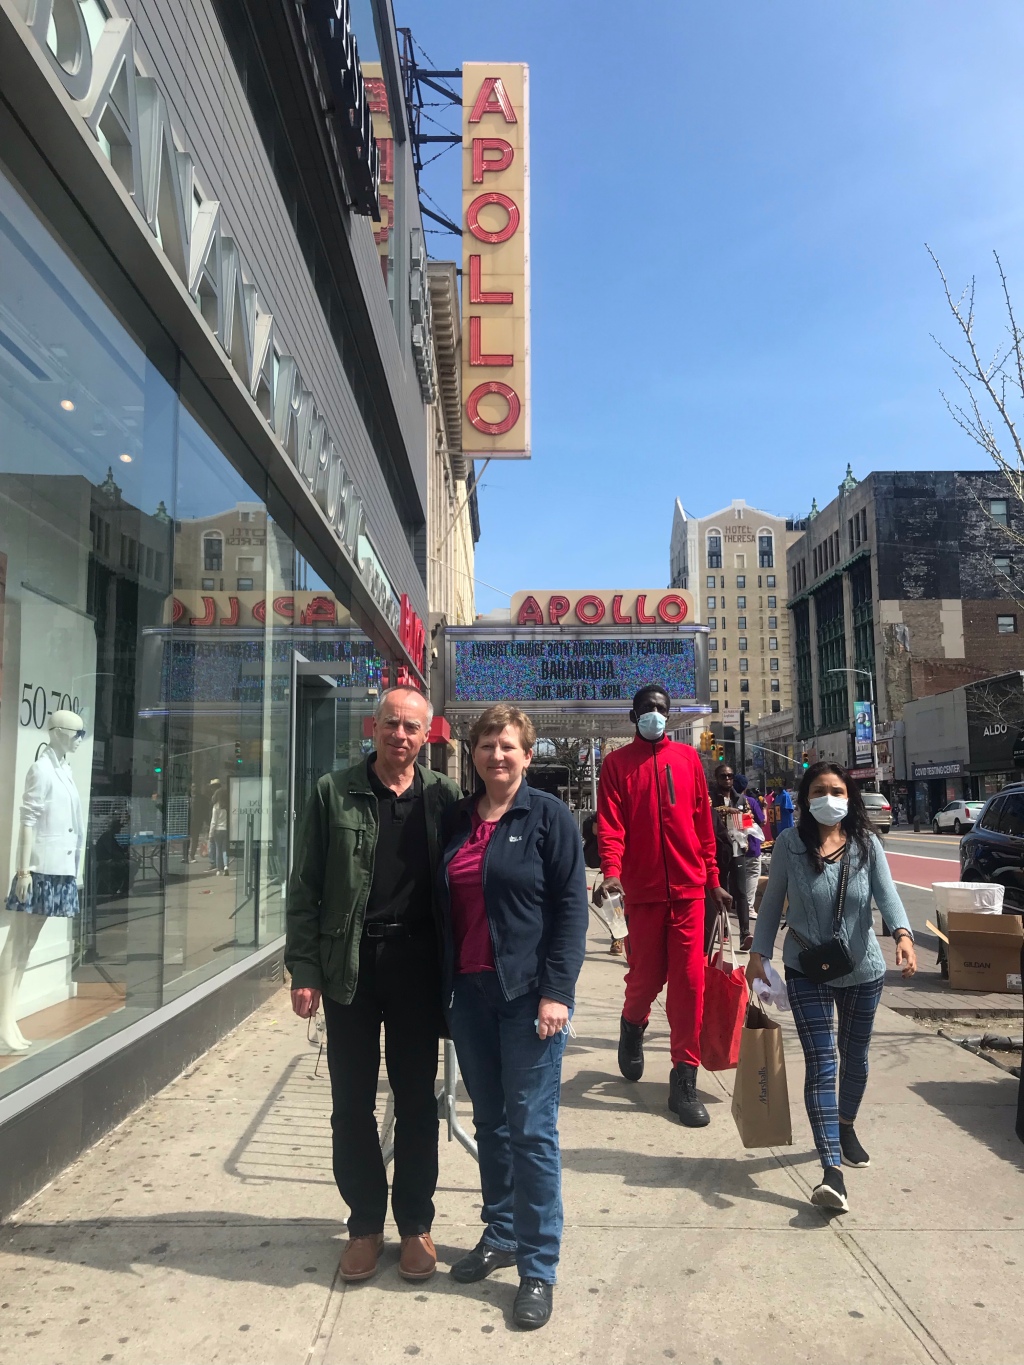 Two visits to the Apollo Theater, Harlem